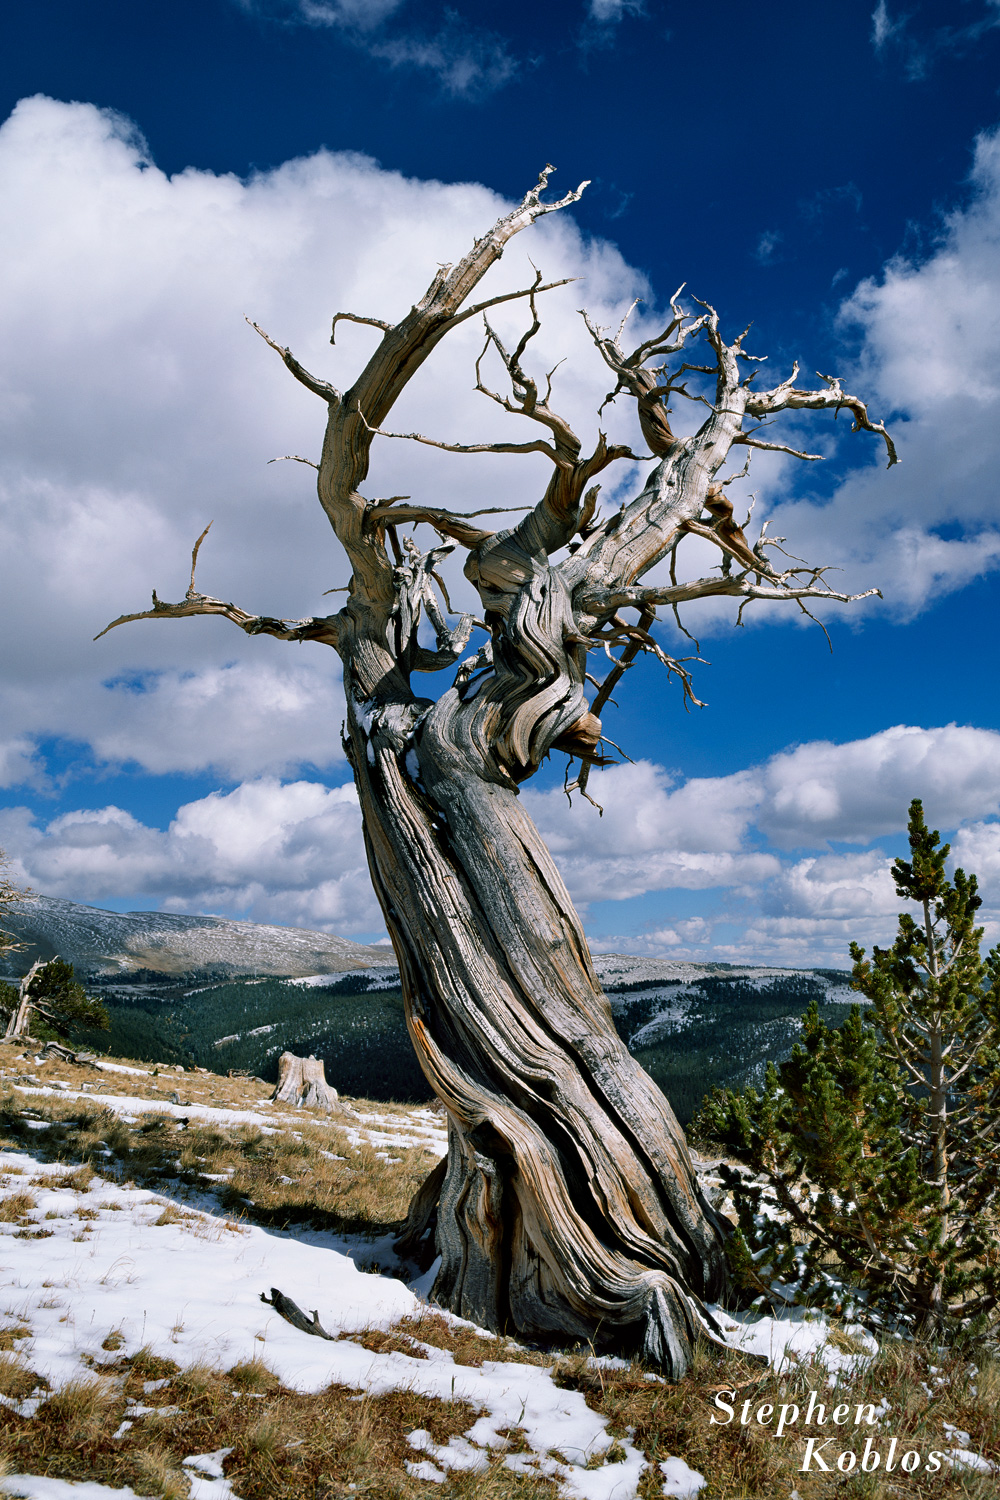 Another Ancient Bristlecone Pine twisted by the forces of the hurricane force winds.  Limited Edition of 250